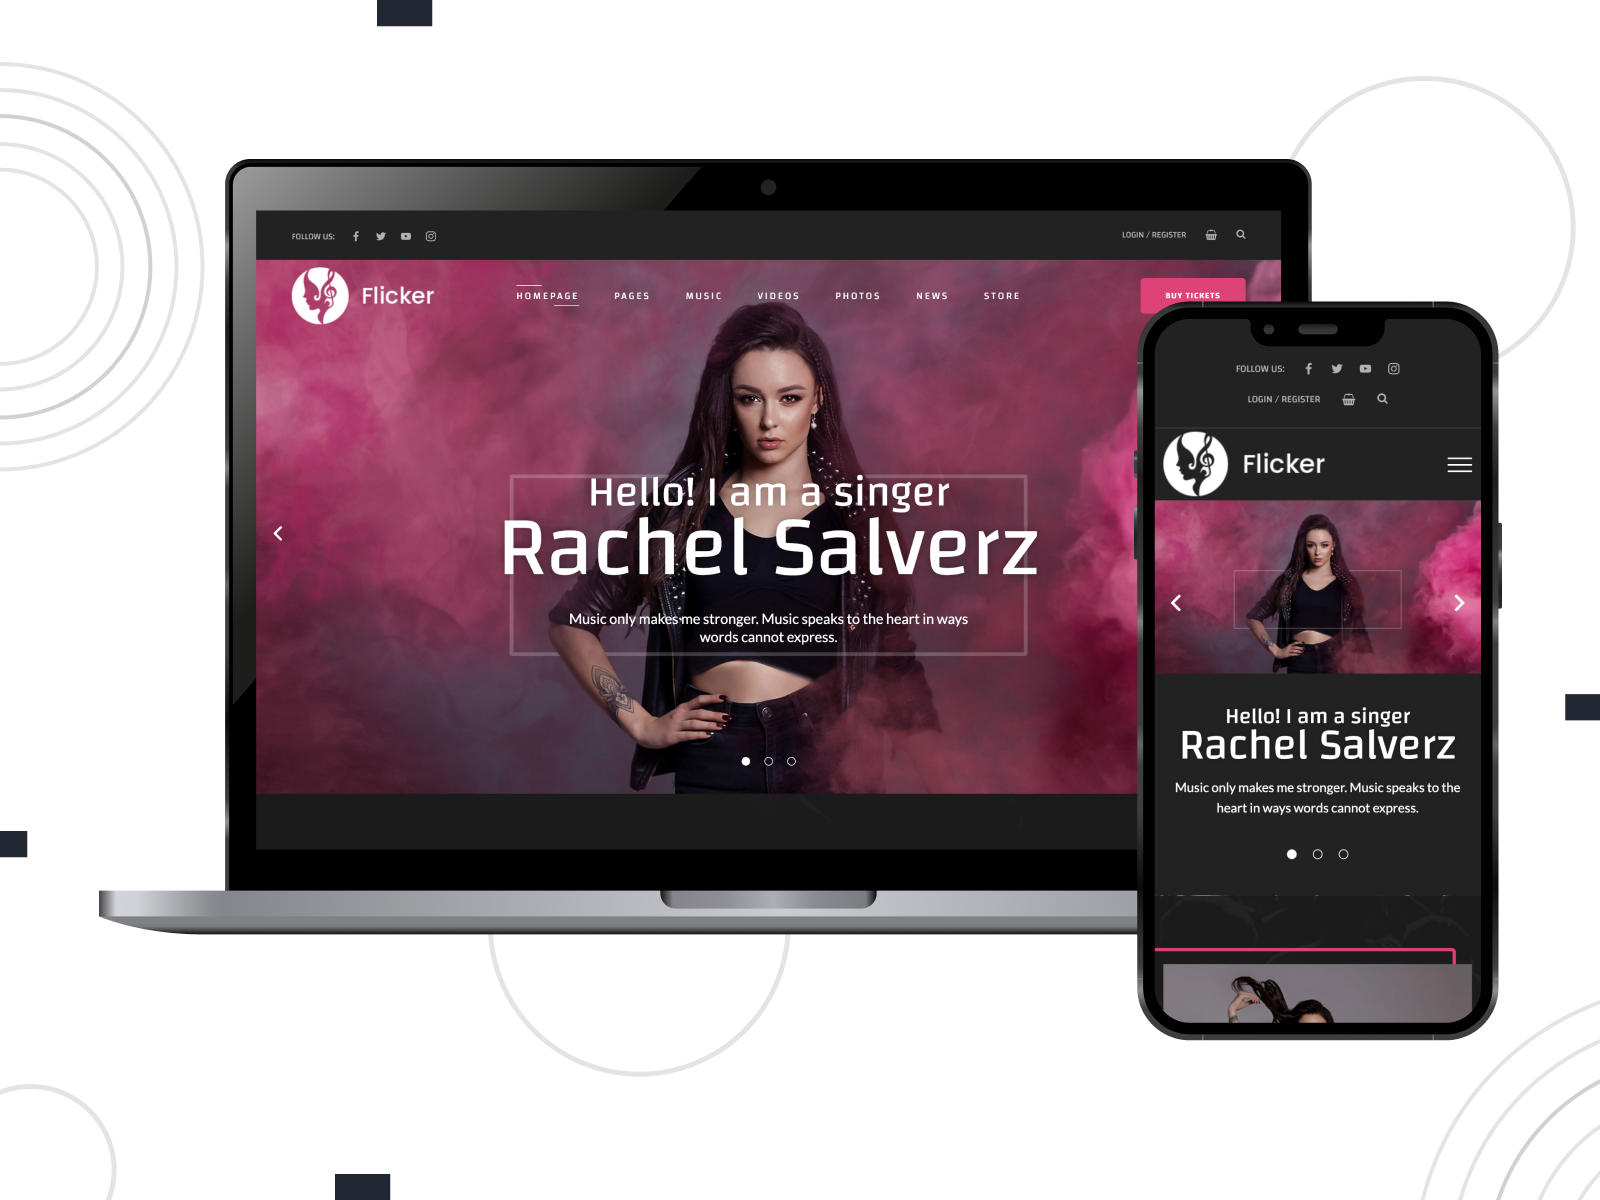 Image of Flicker, an interactive music WordPress theme with an album showcase.